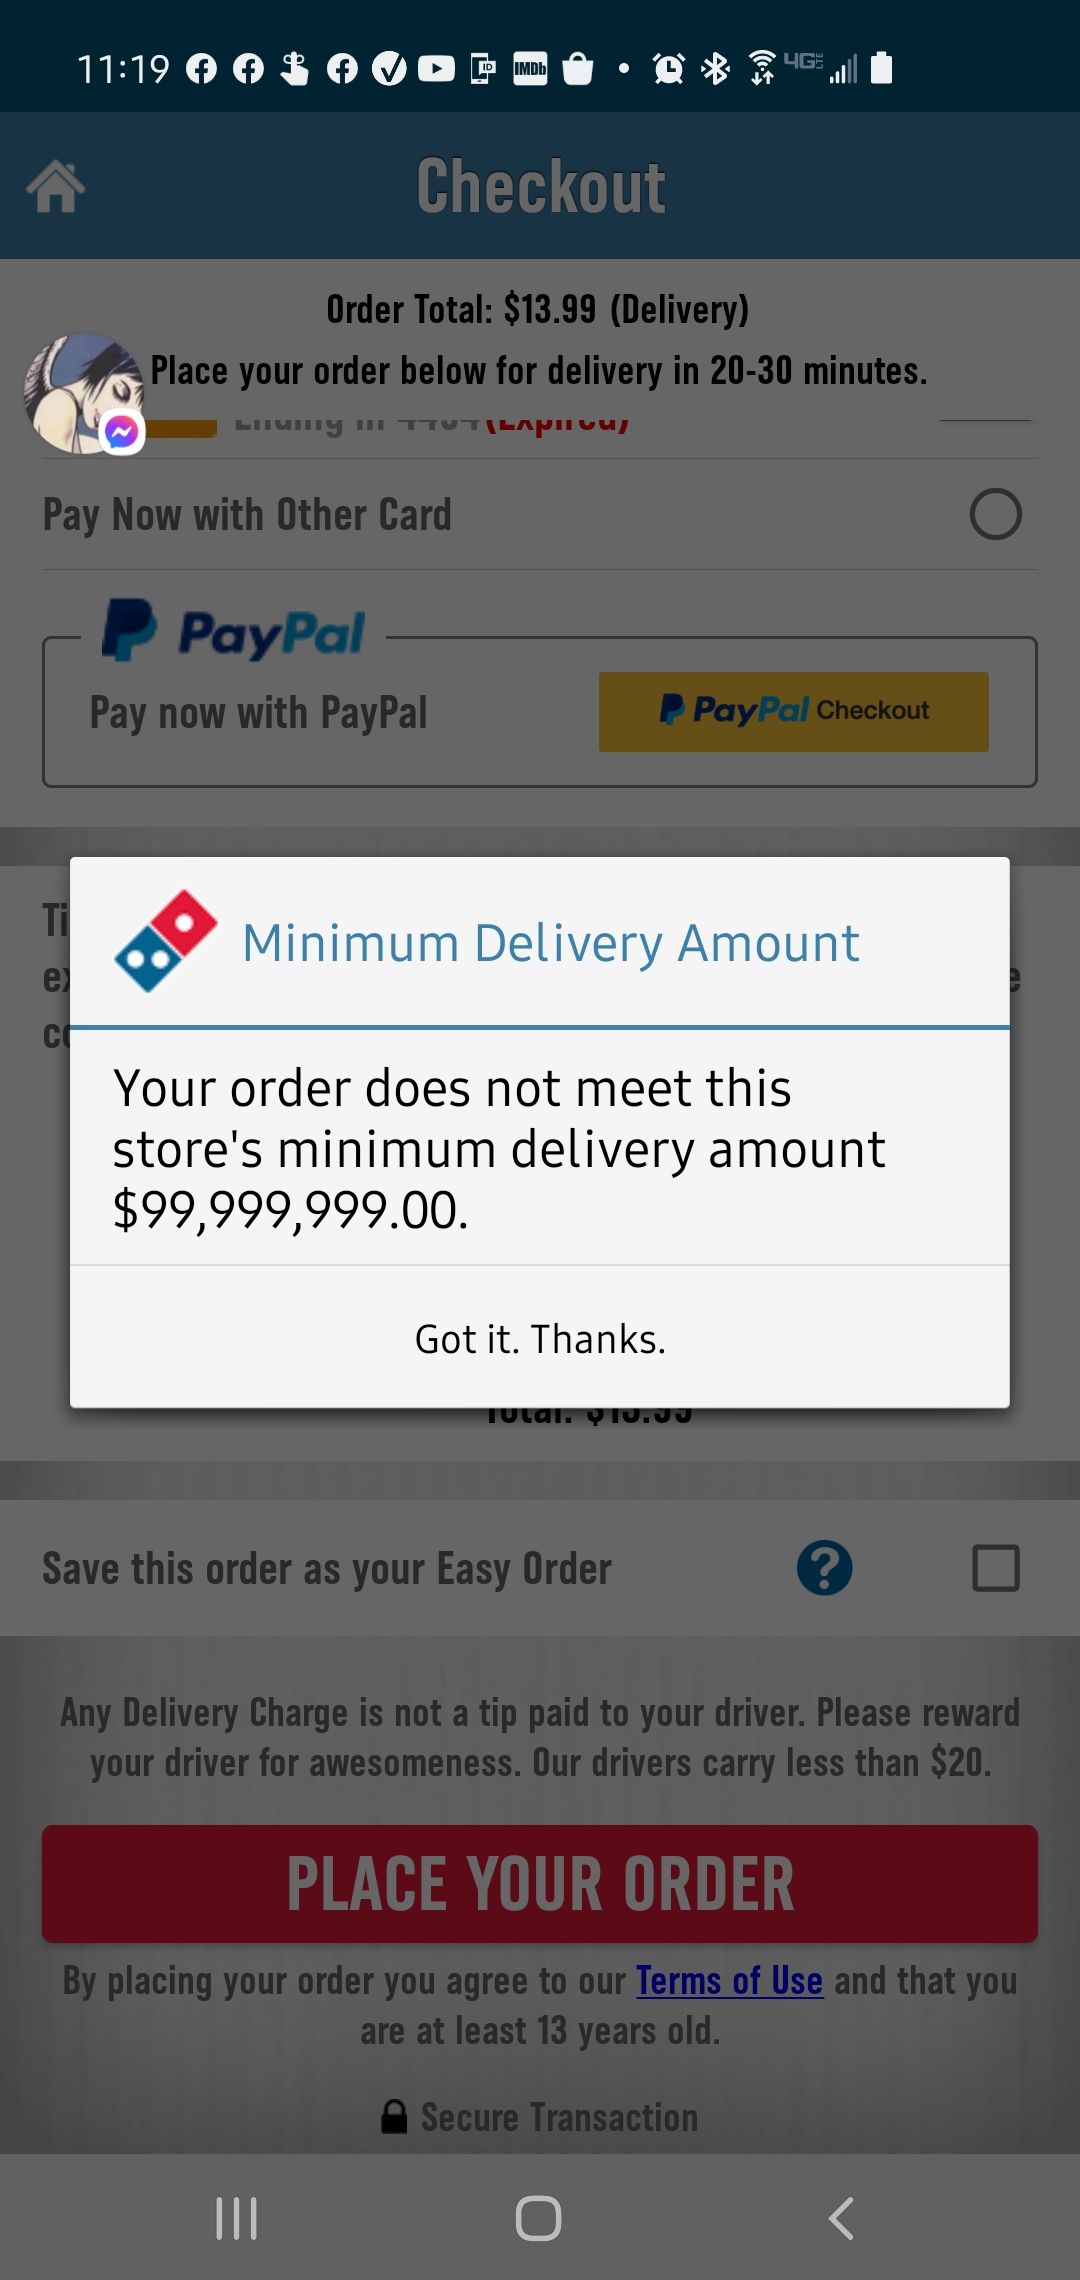 I guess ill never get delivery again